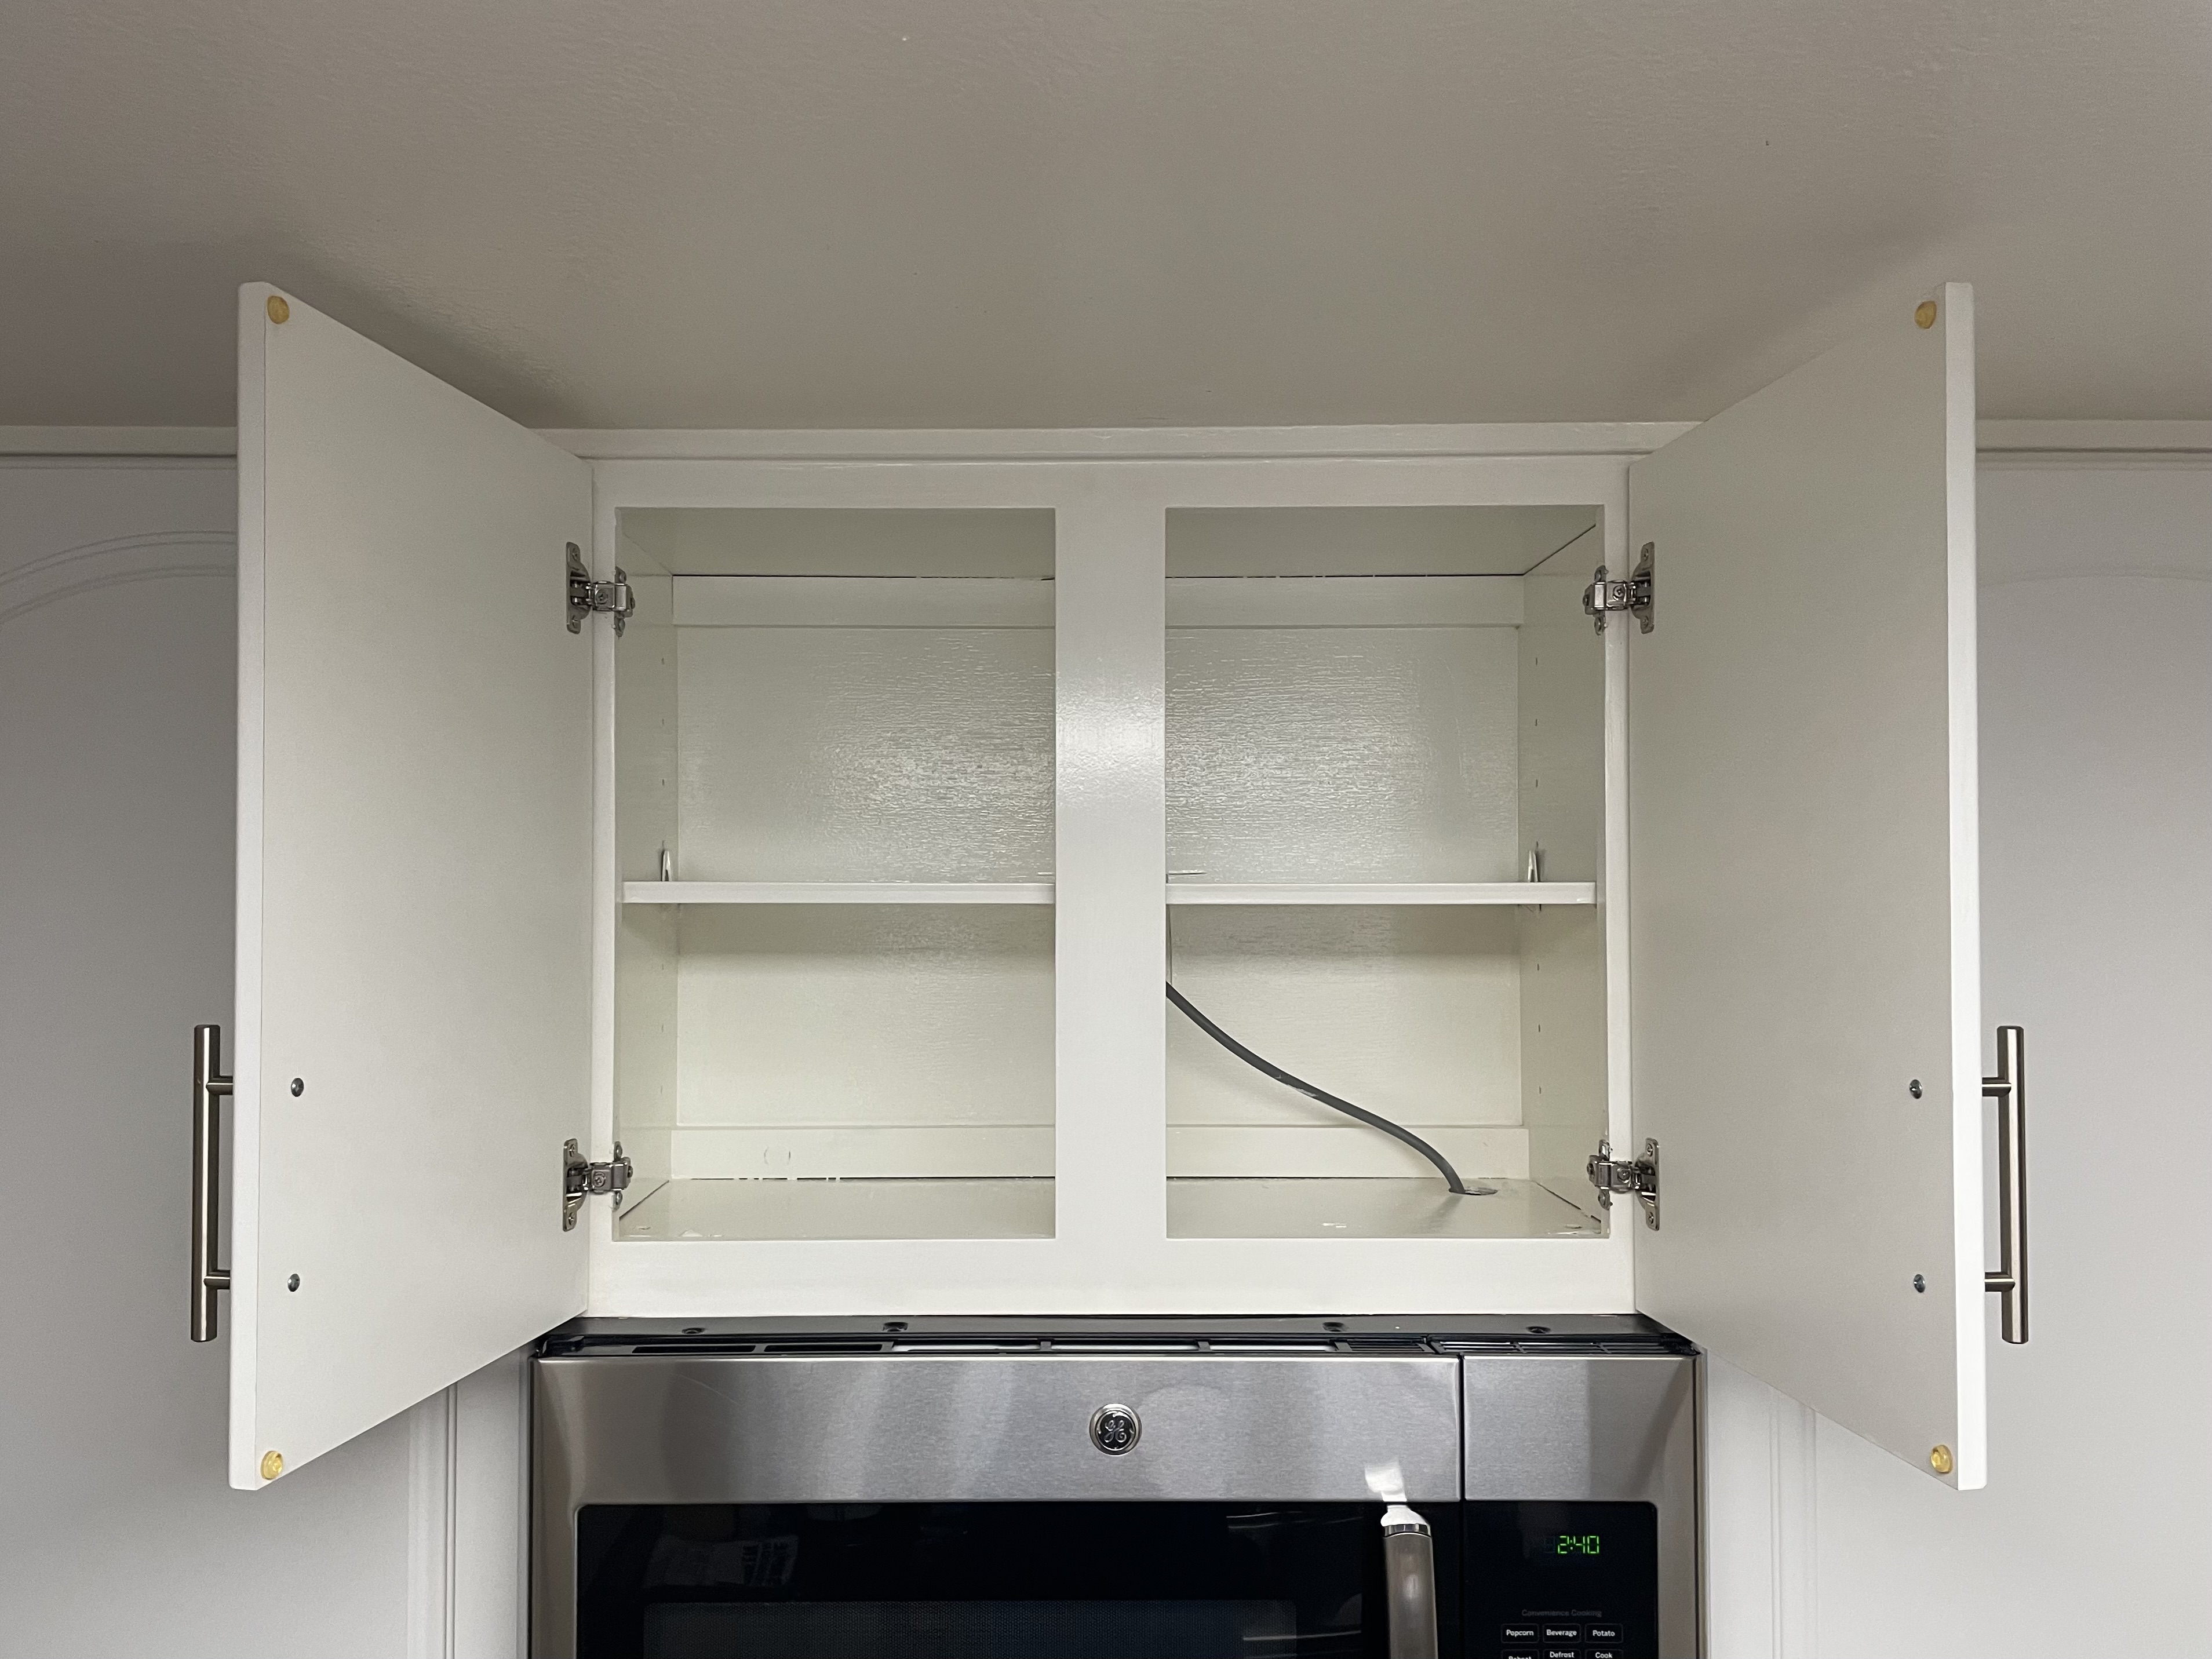 An open white kitchen cabinet above a microwave. The cabinet has two doors, both open to reveal empty shelves inside. There's a center divider and one visible shelf in each compartment. The cabinet doors have metal handles. A black power cord is visible on the bottom shelf. Below the cabinet, a stainless steel microwave with a digital display showing 2:40 can be seen.